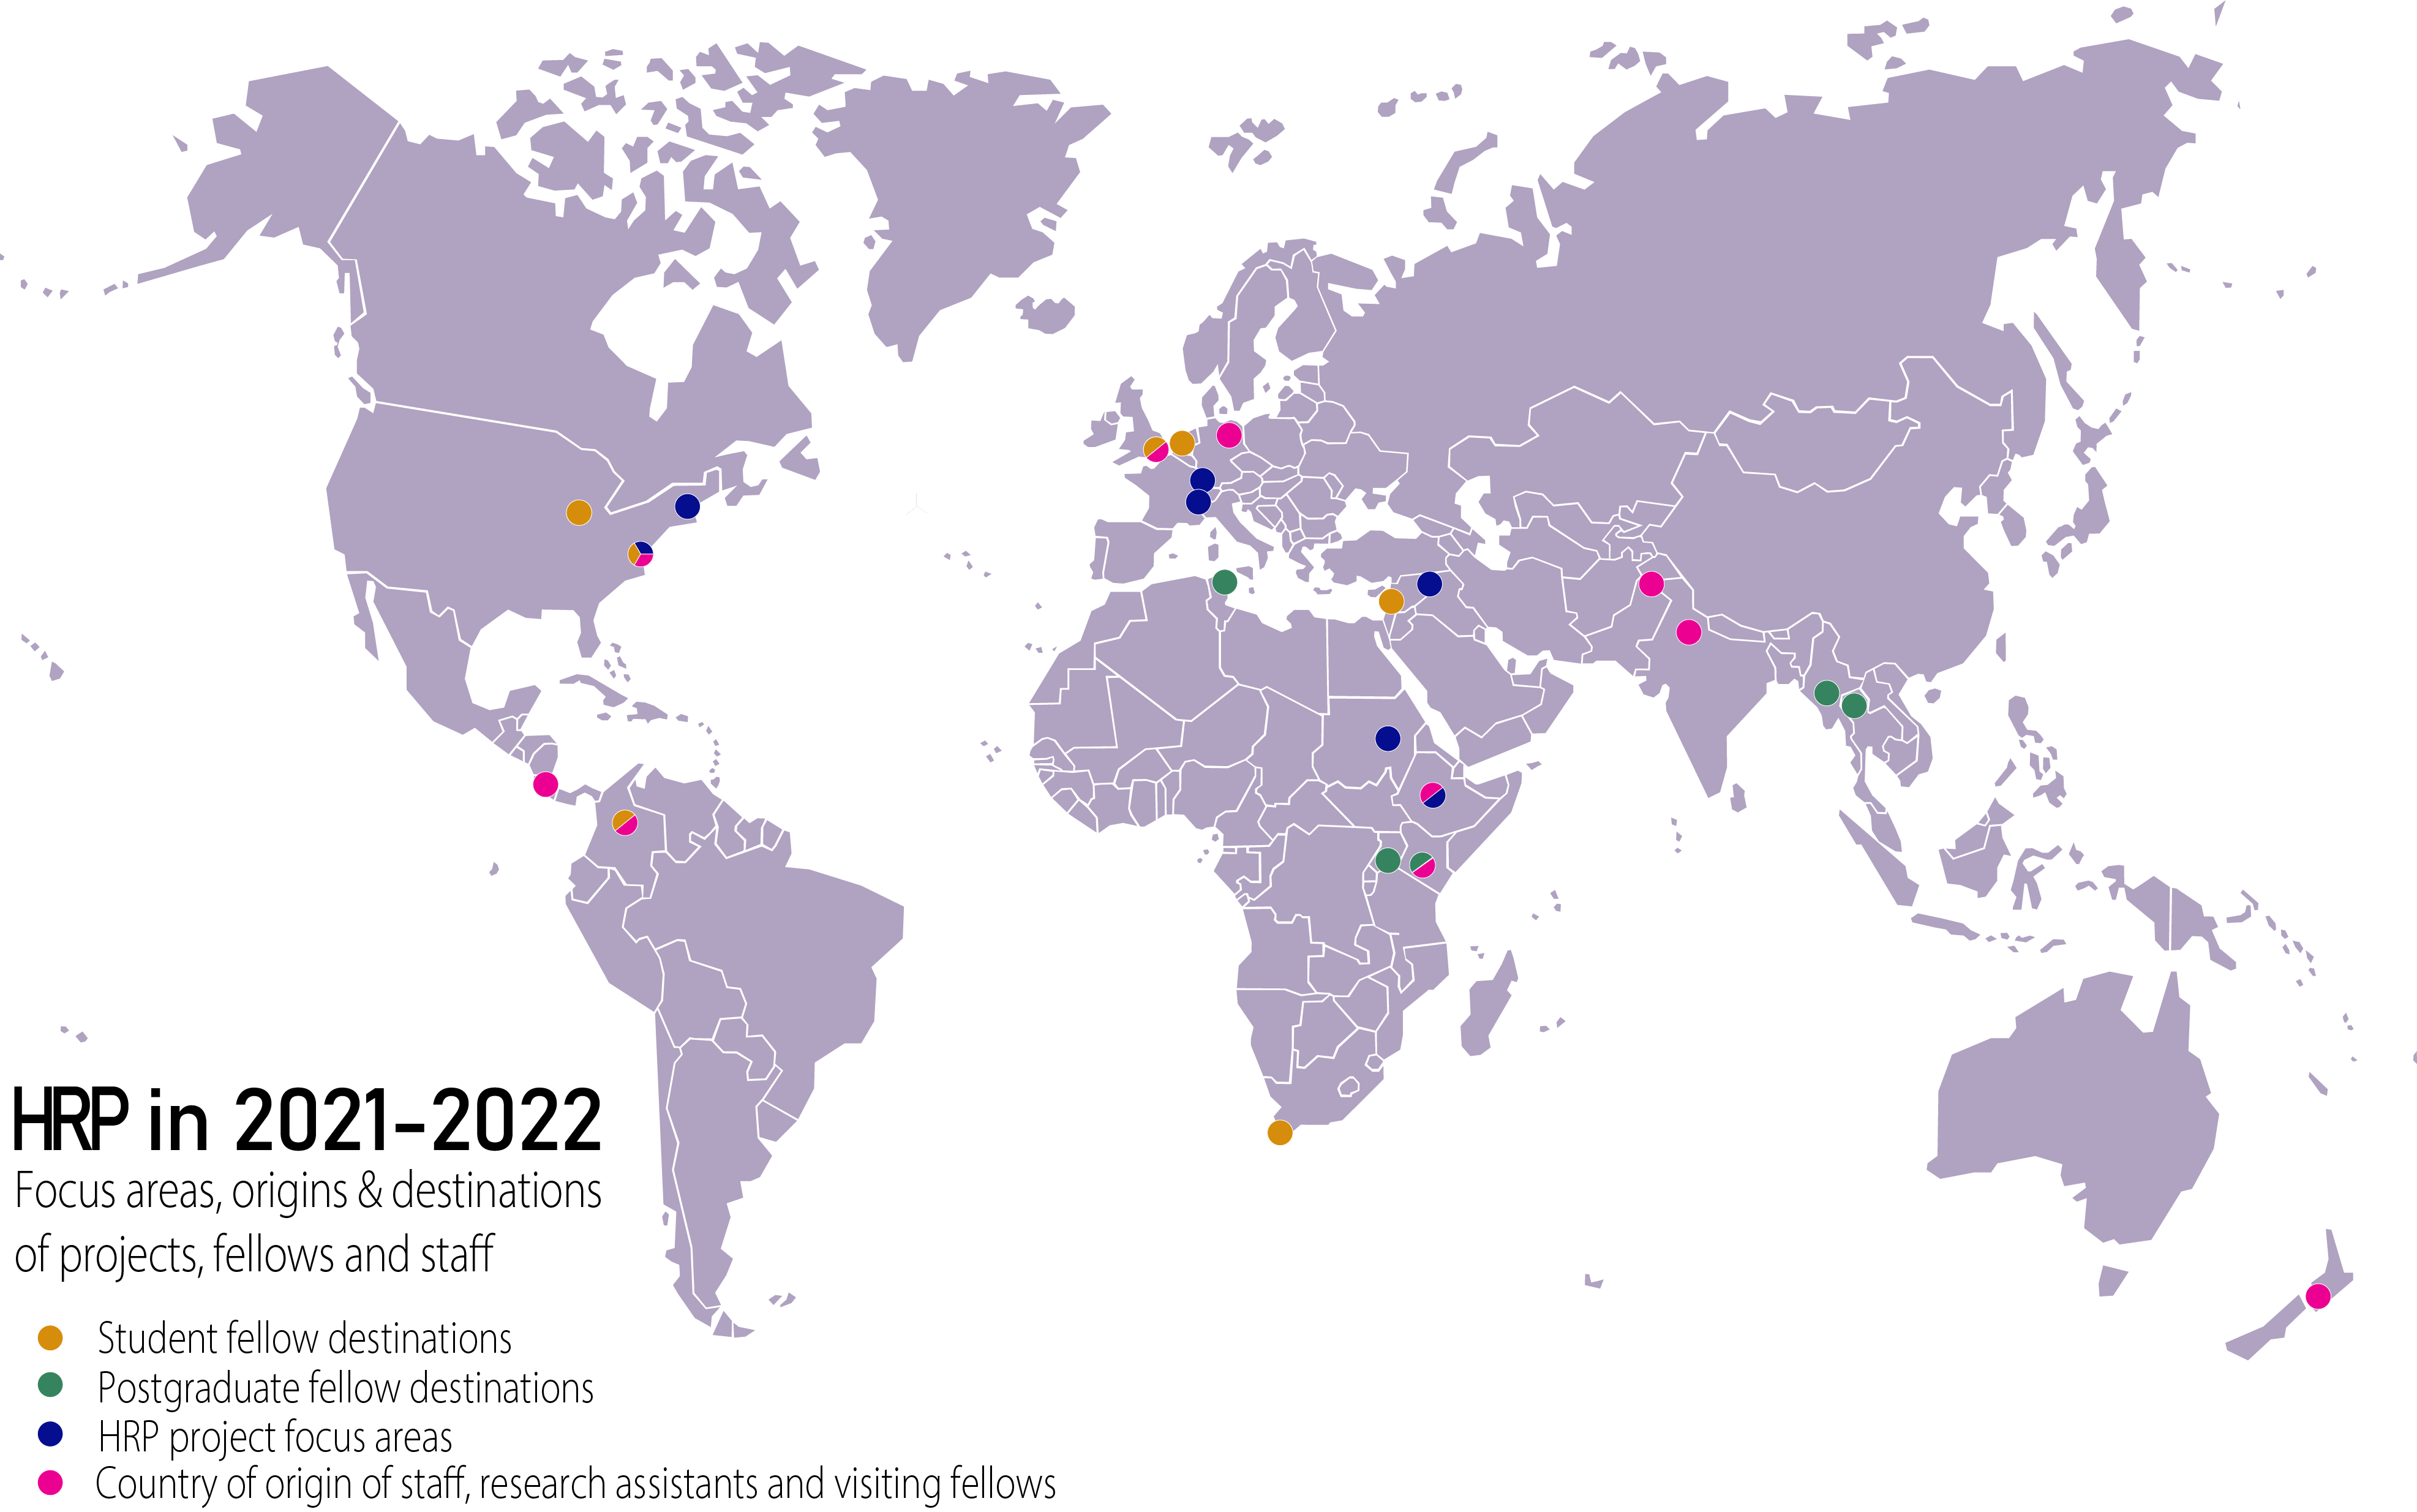 Purple tinted map with colorful dots marking the activity of HRP from 2021-2022